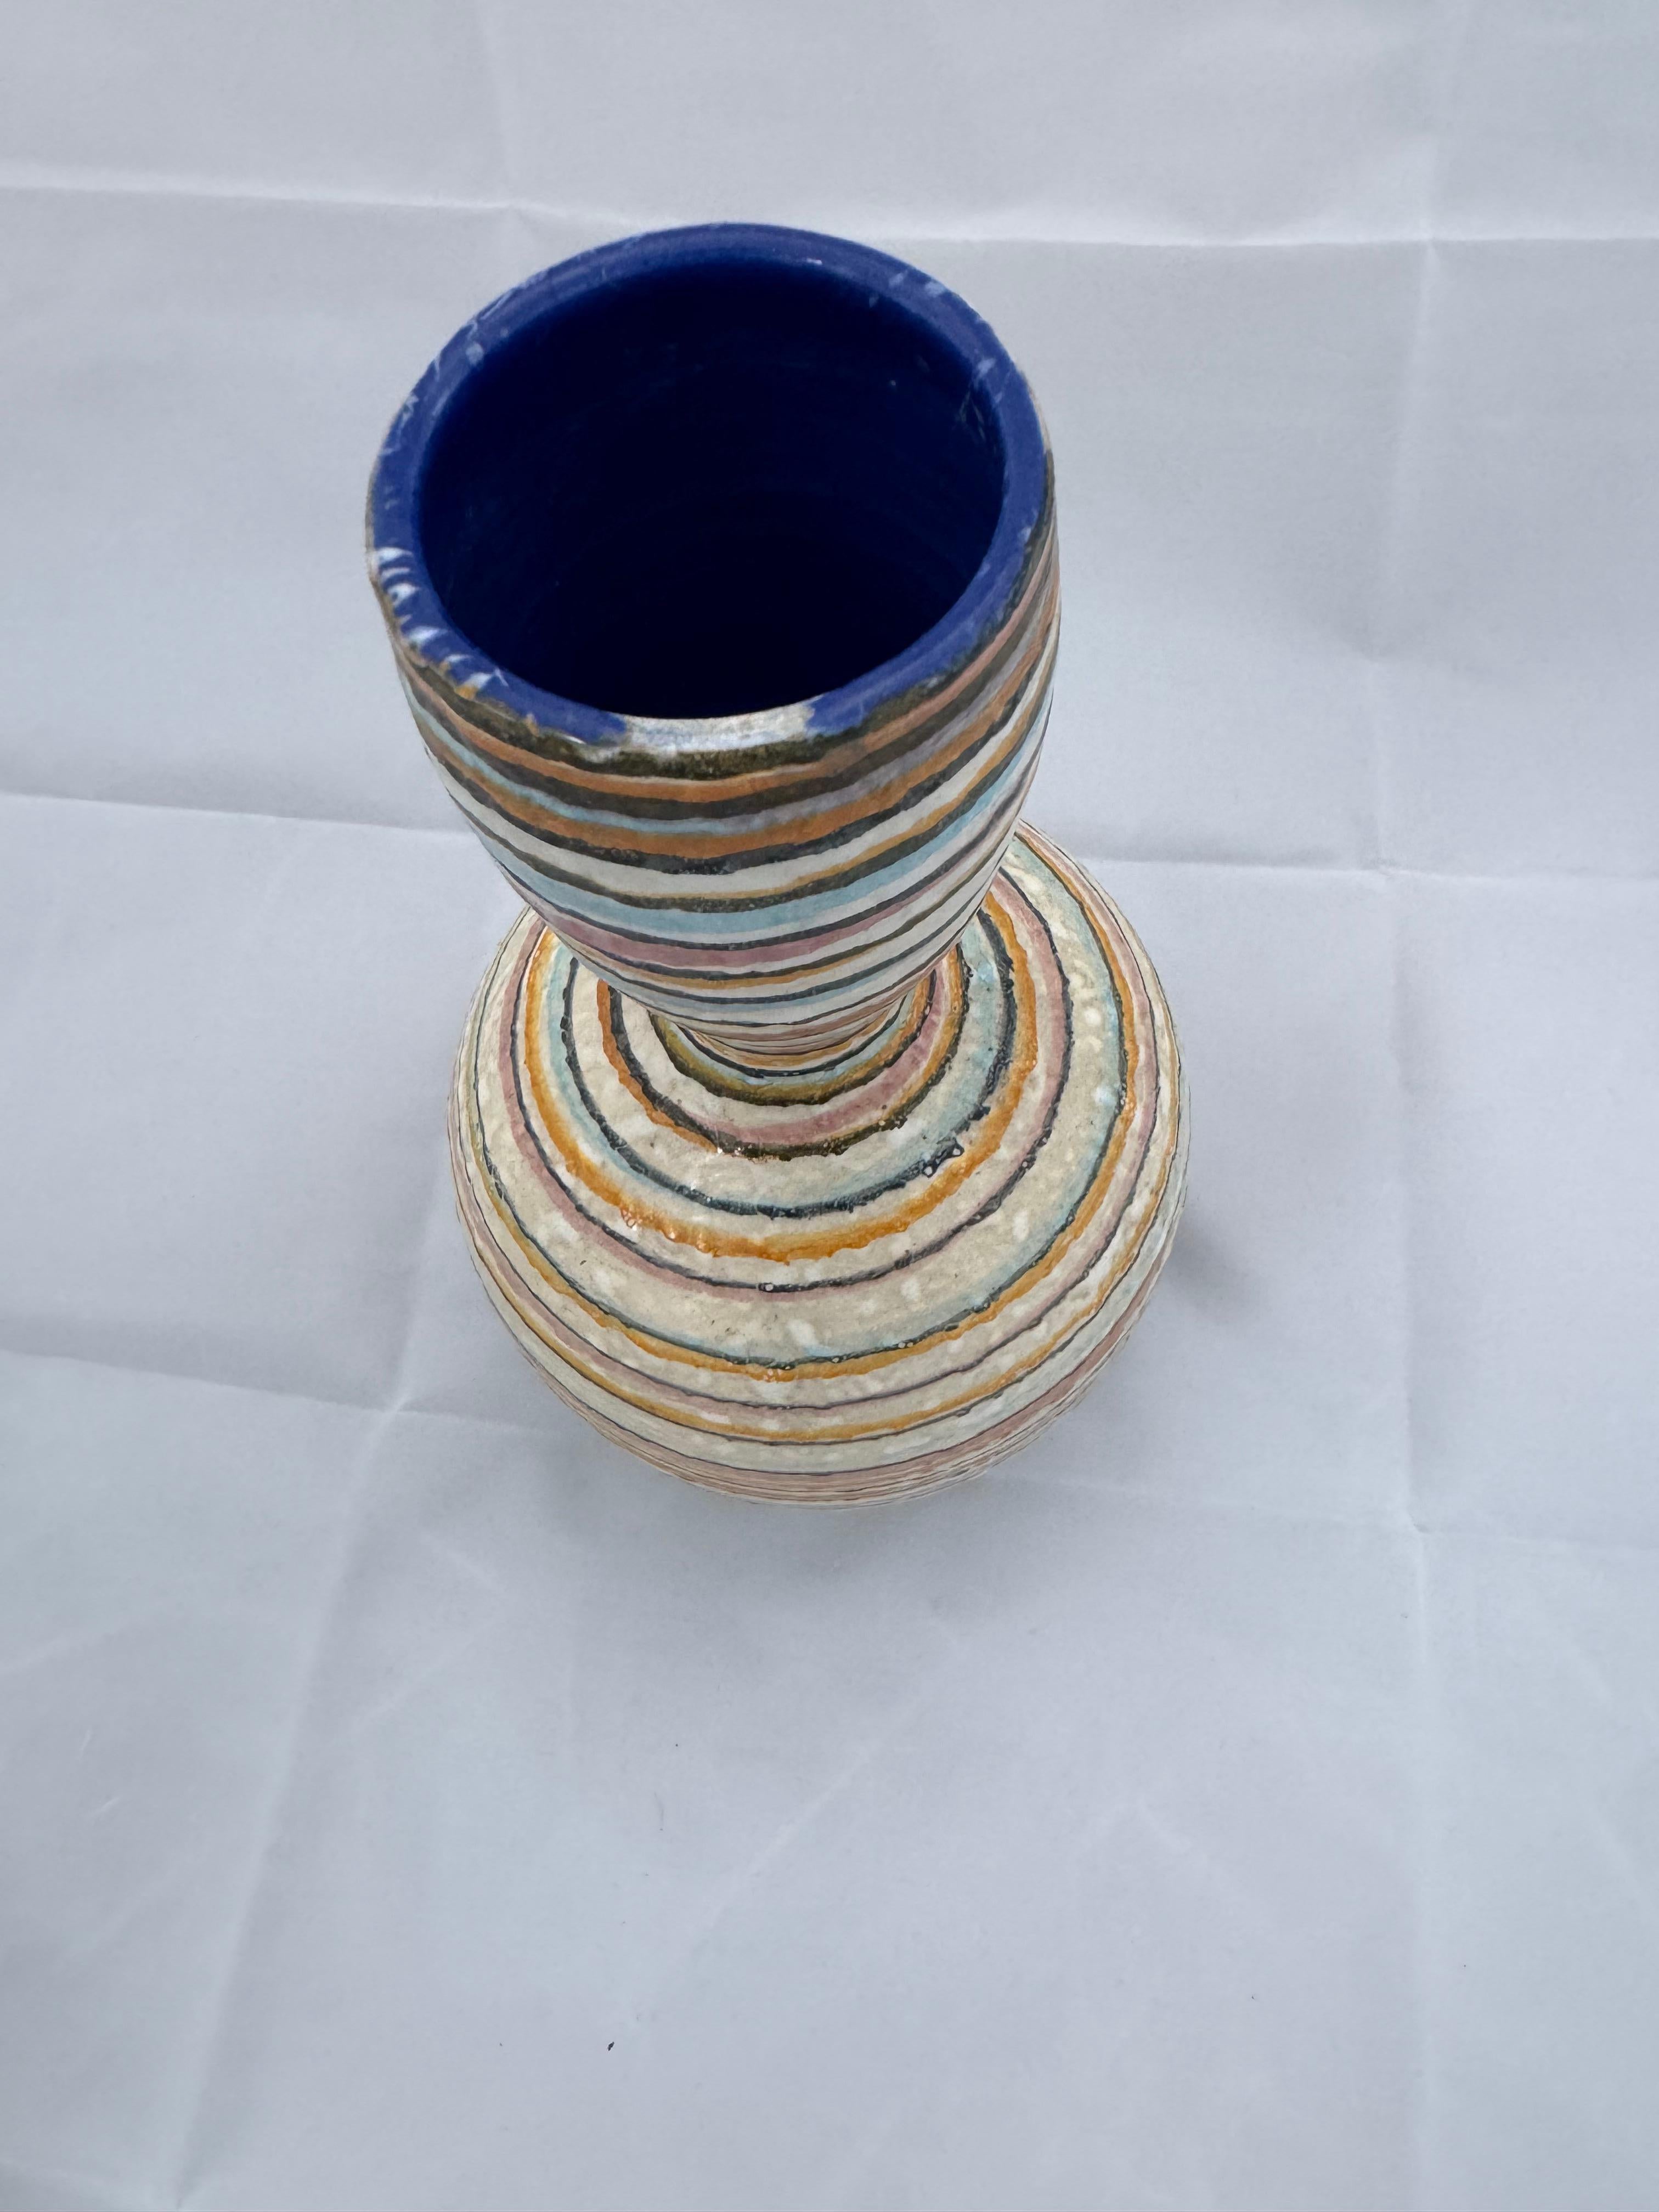 Hand made studio pottery vase with colorful blue, yellow, white black, brown and orange stripes. Reminiscent of Fantoni pottery, this piece is a real eye catcher. The rim shows a slight divot which is actually in the glazing and not a chip. A